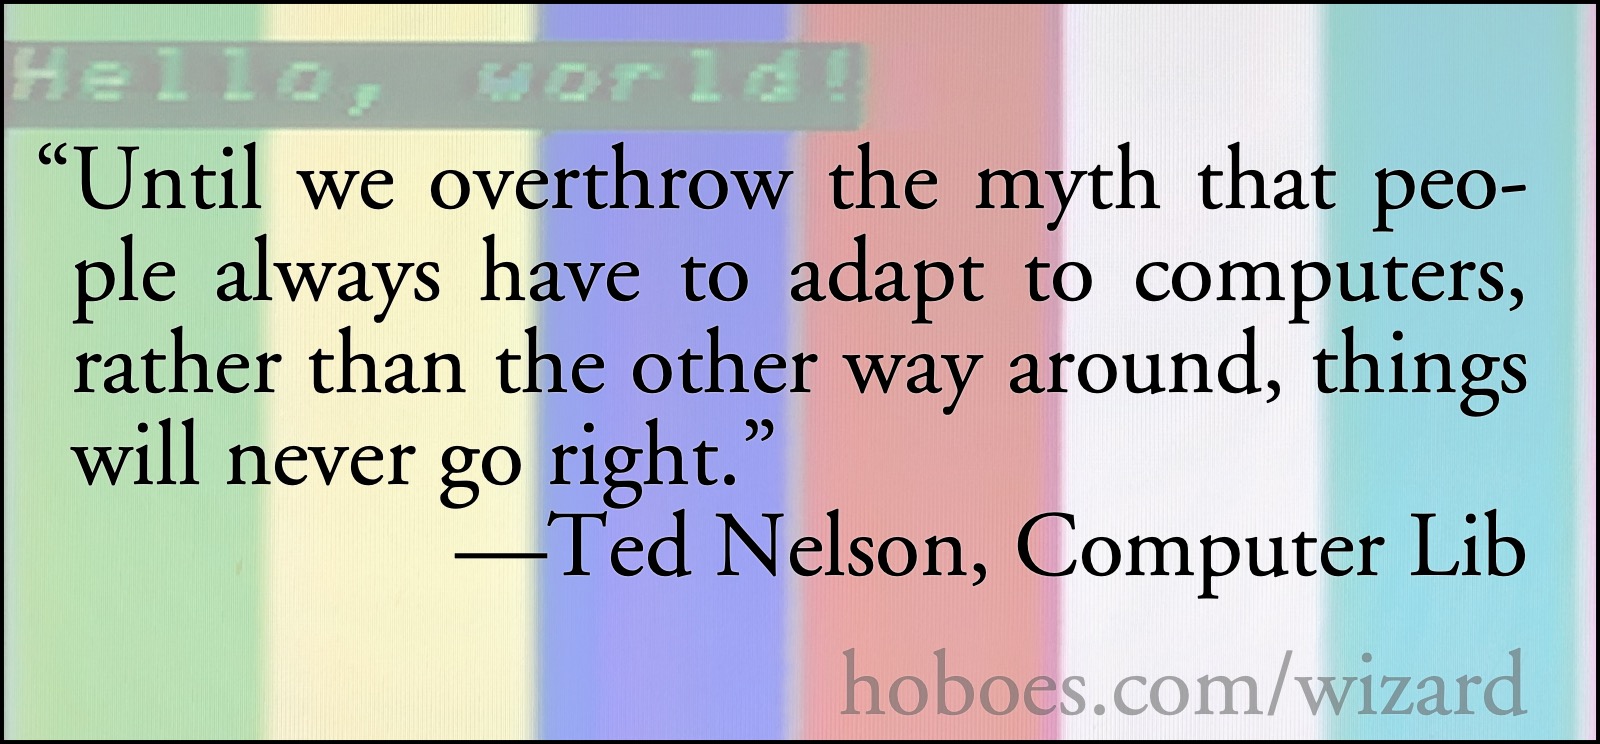 Adapting to computers: Ted Nelson: we must overthrow the myth that people have to adapt to computers.; computers; technology policy; Ted Nelson